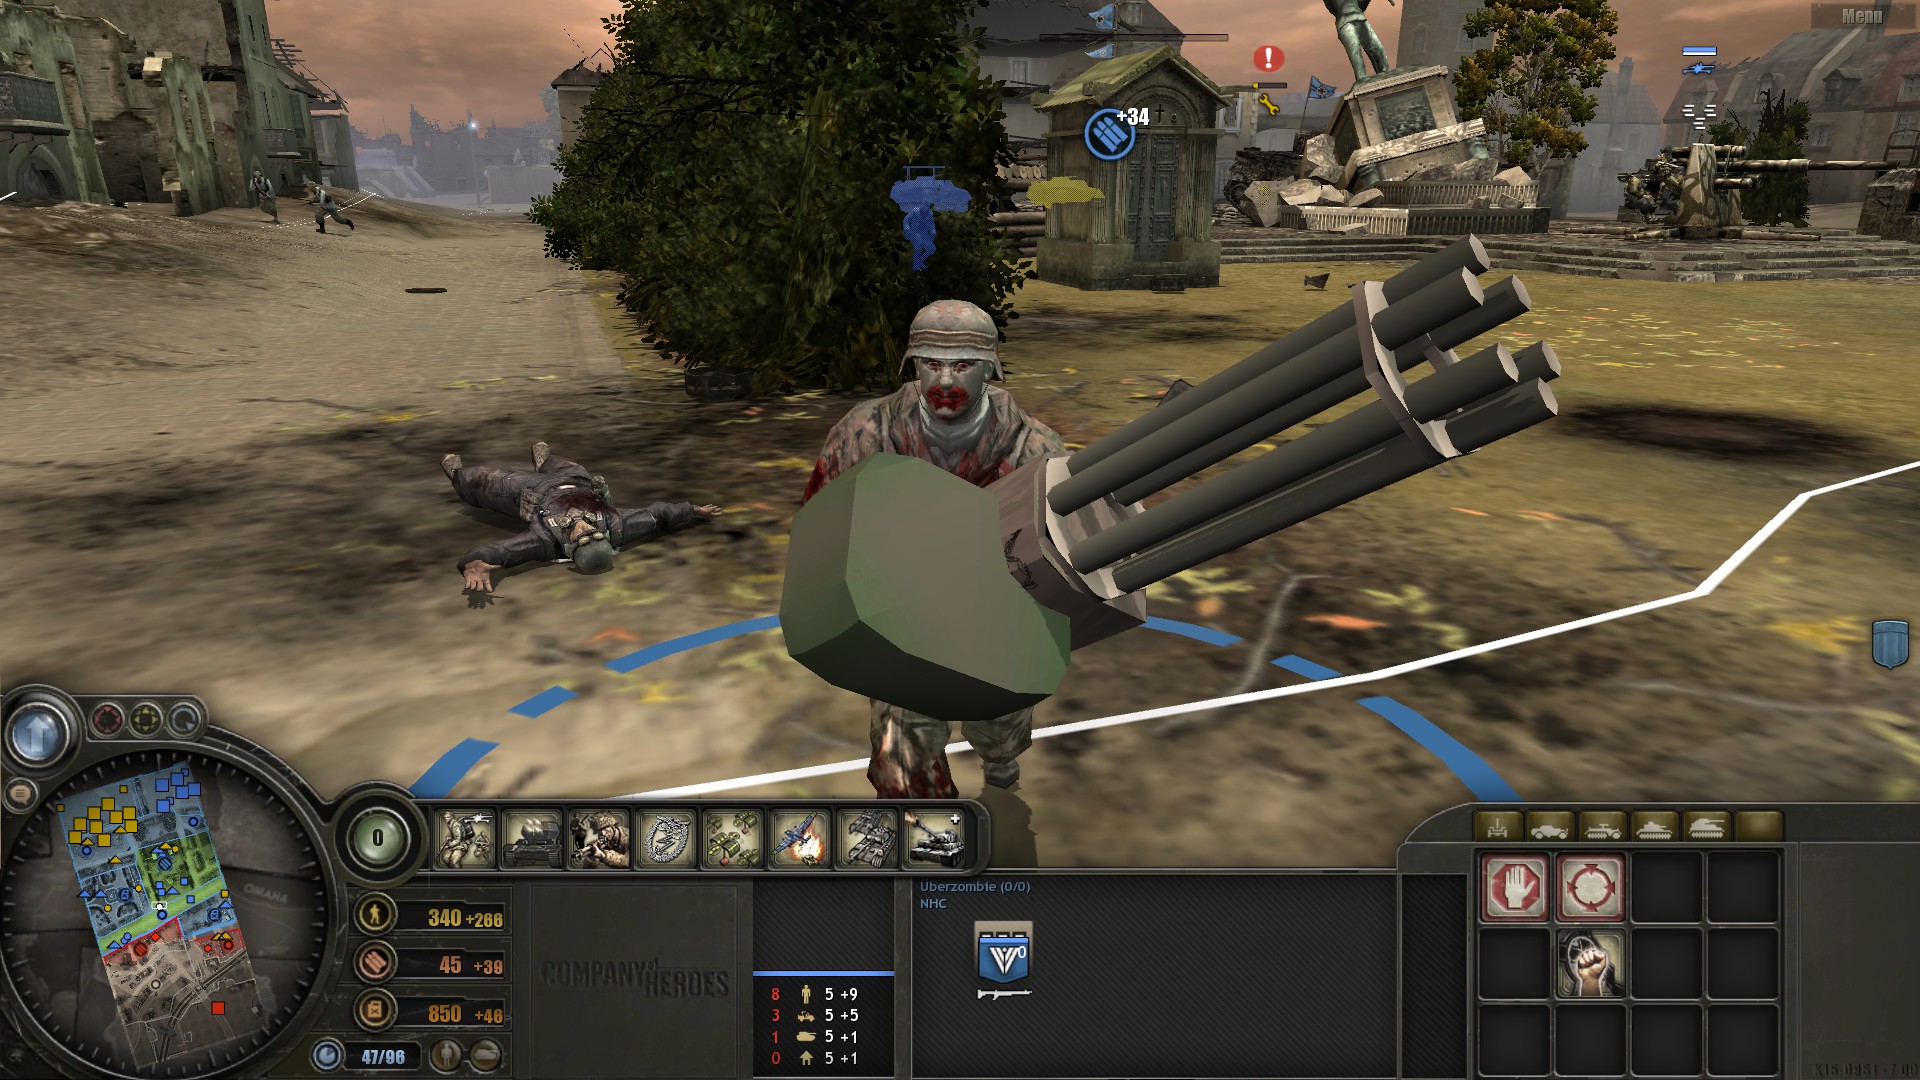 company of heroes v2.602 cheat mods